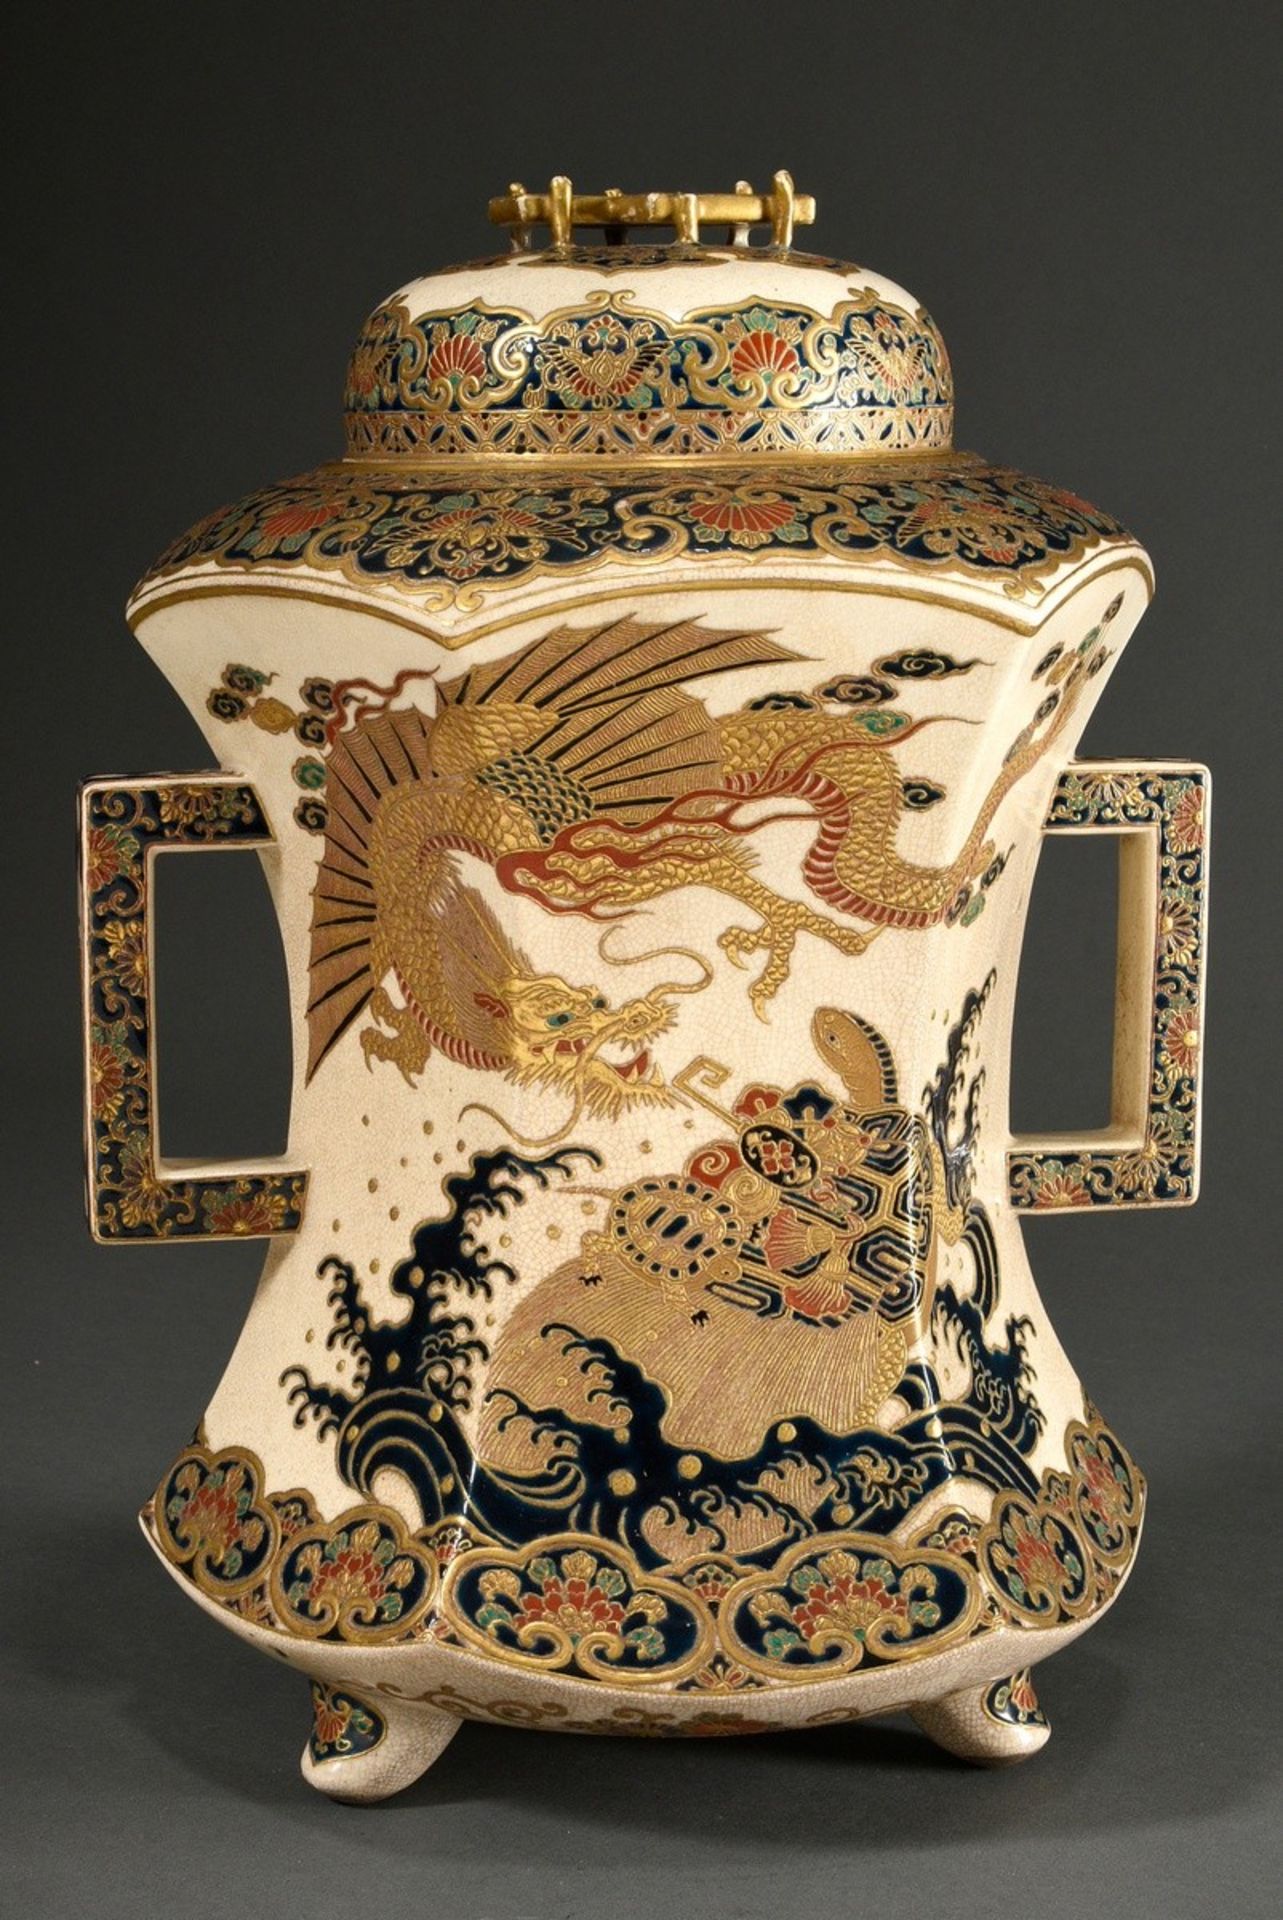 Japanese satsuma lidded vessel with polychrome decoration "Dragon and Dragon Turtle" and handles to